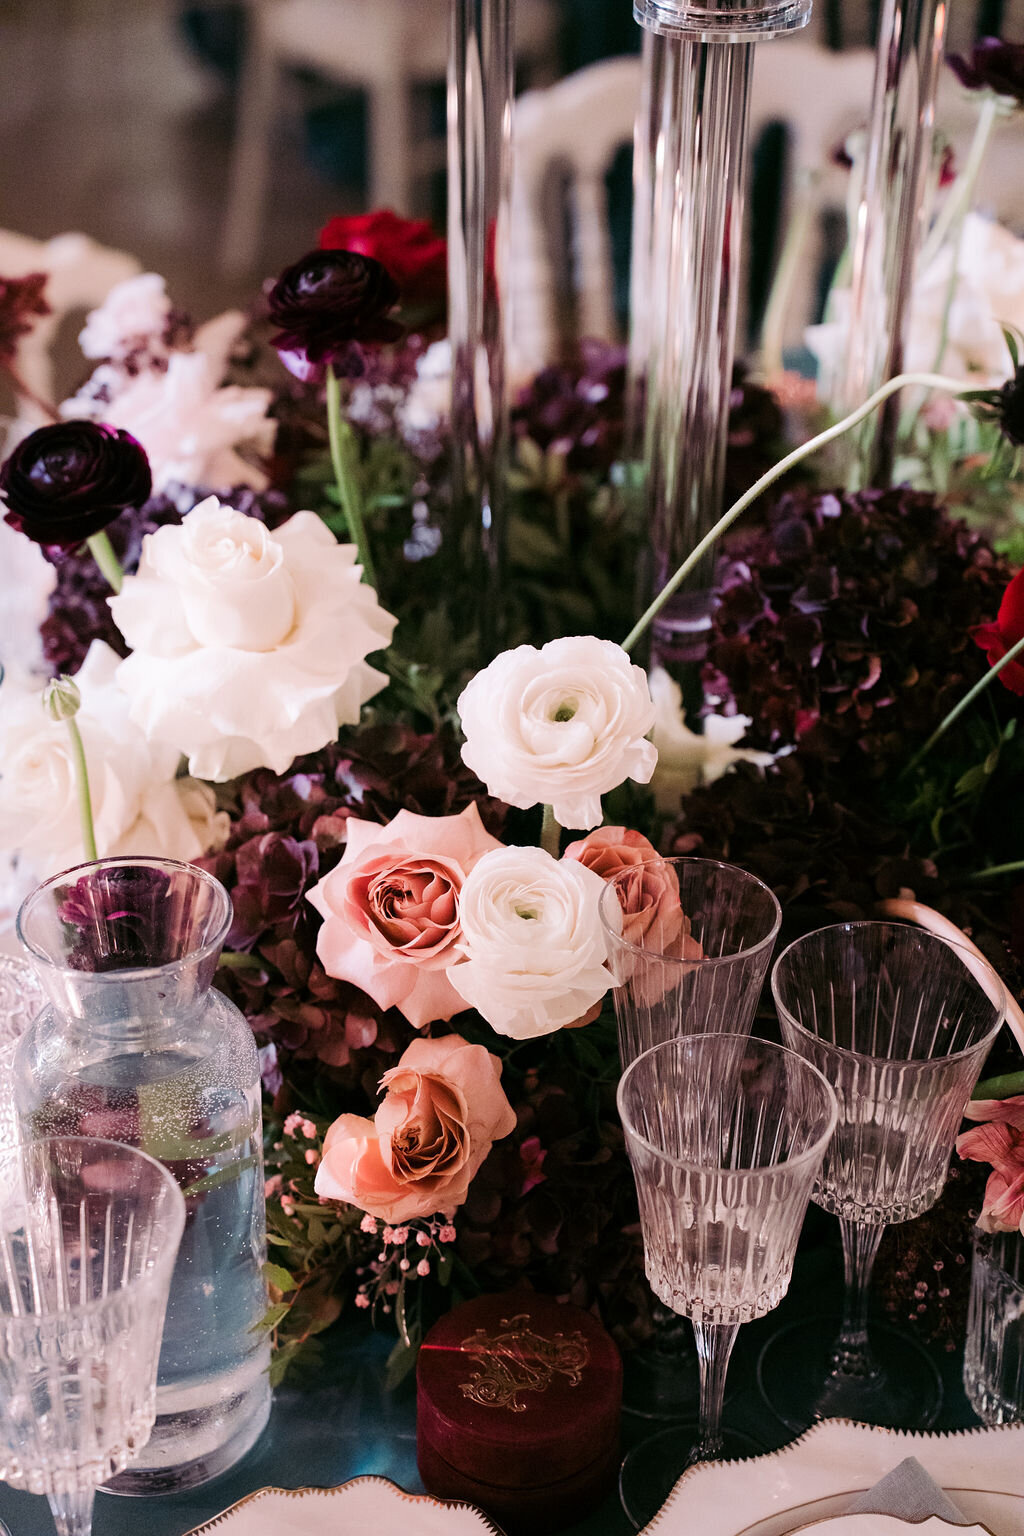 Luxurious and opulent details for a wedding reception